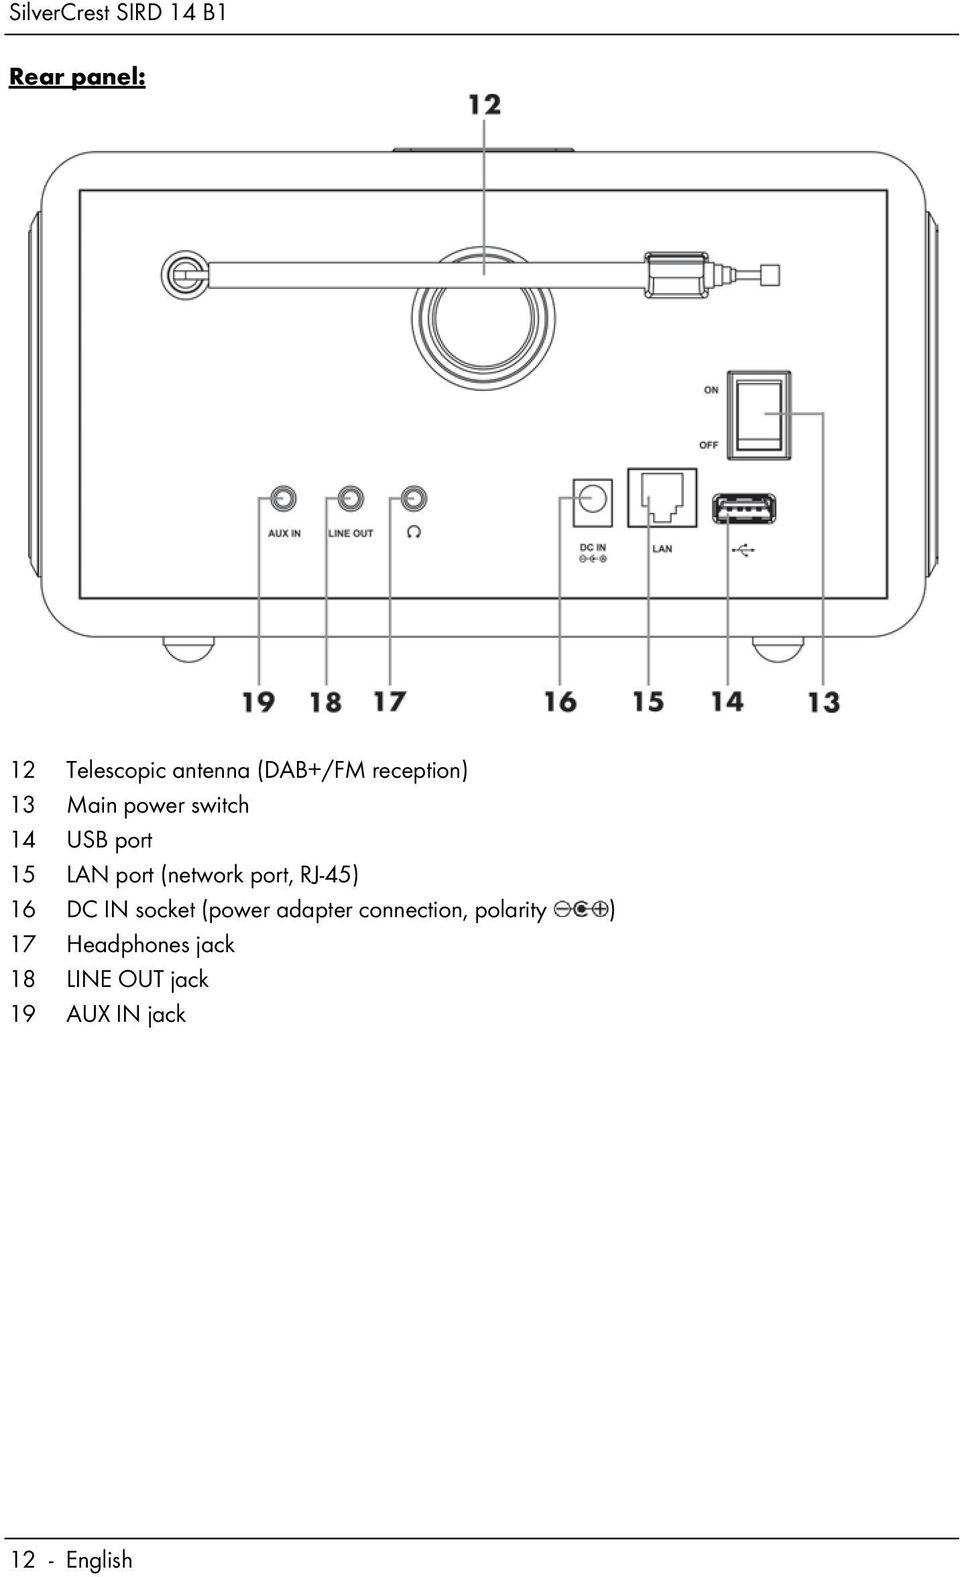 RJ-45) 16 DC IN socket (power adapter connection, polarity